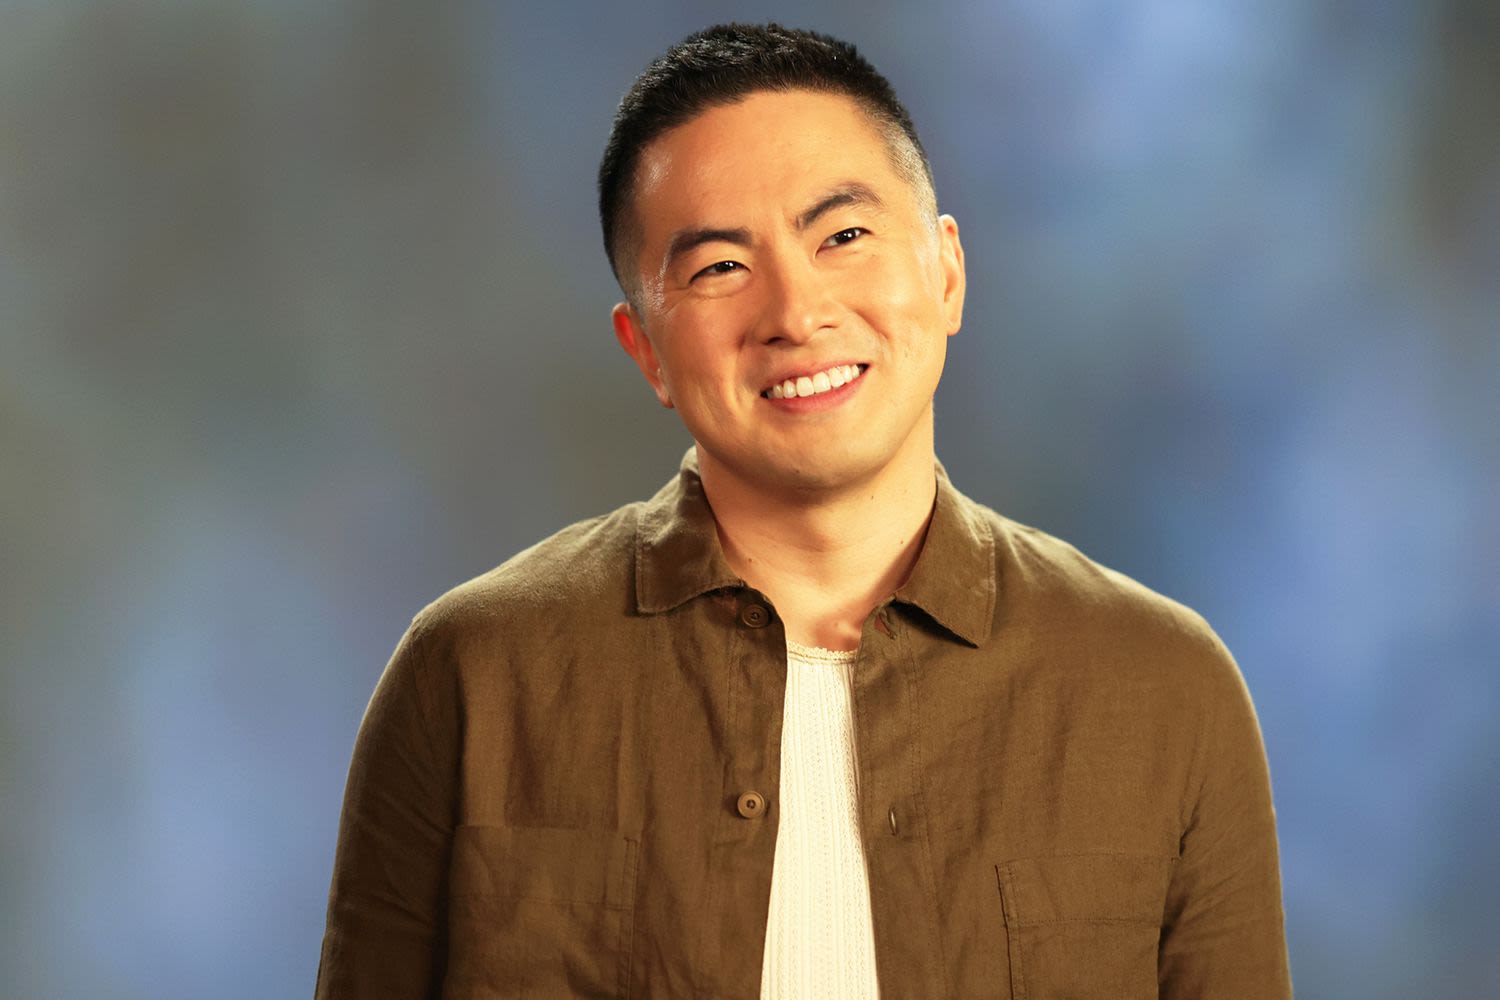 Bowen Yang calls 'Saturday Night Live' the 'cringiest thing in show business'